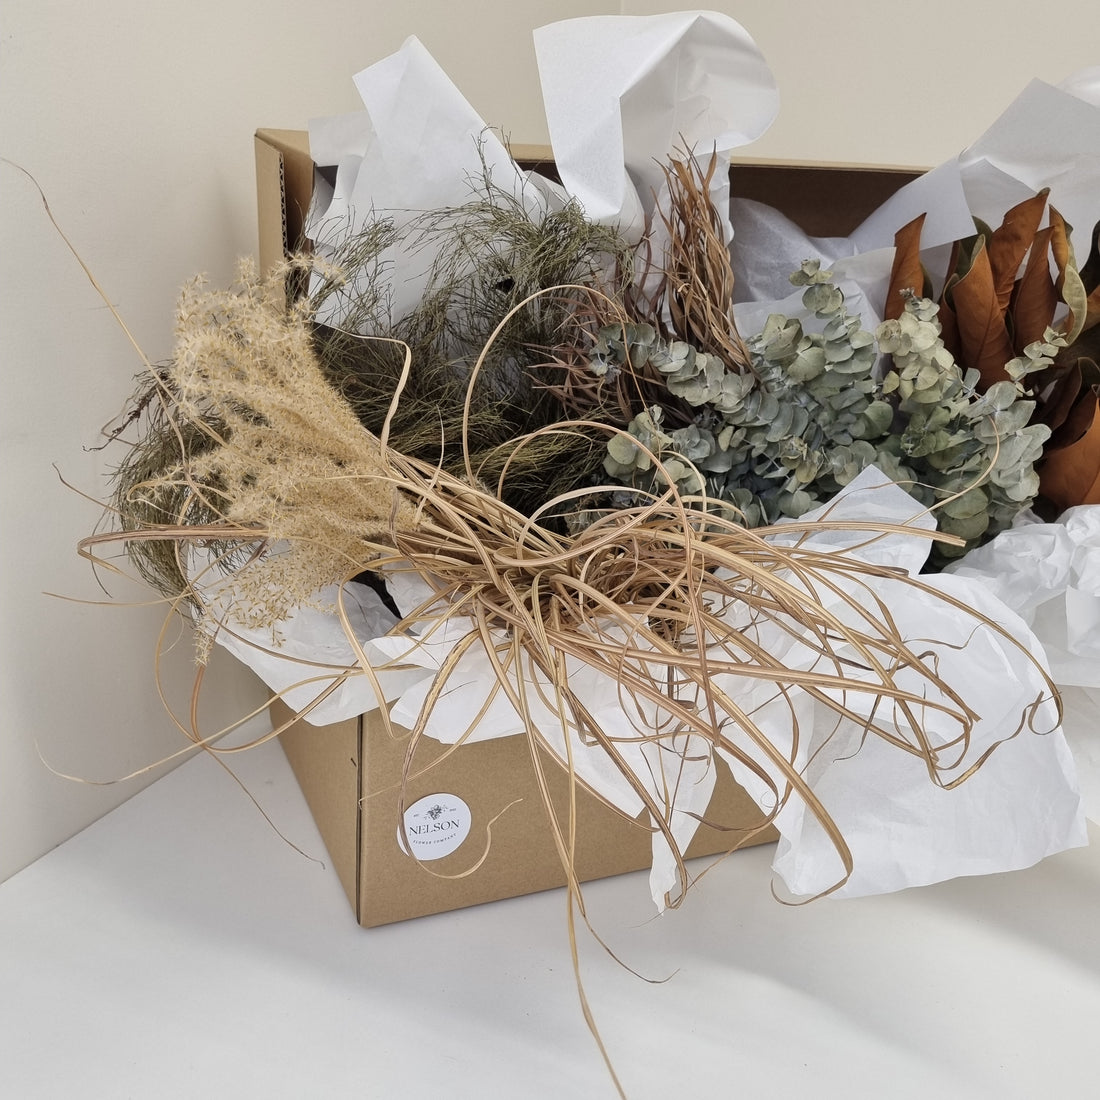 Dried Foliage Box filled with various preserved greenery, in a cardboard box with white tissue paper.